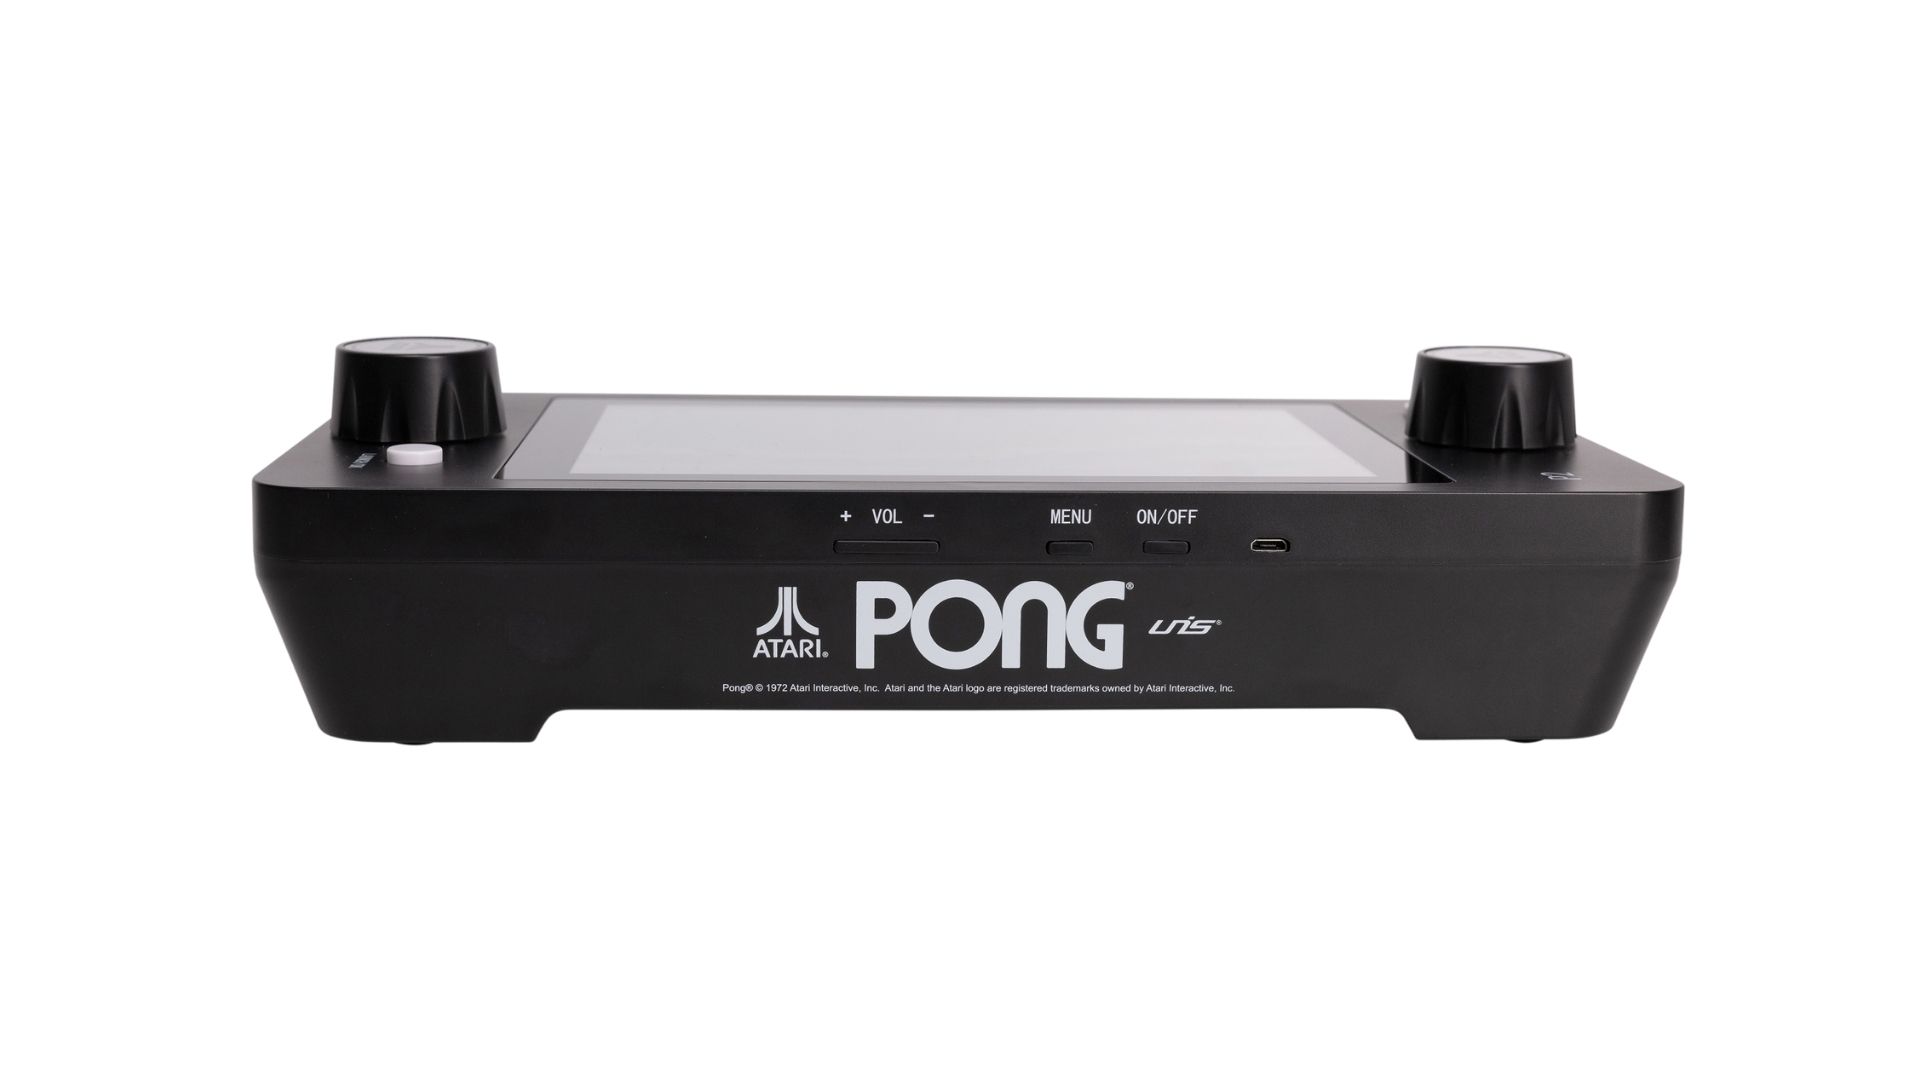 Experience the Atari Mini PONG Jr., a Classic, Retro, Arcade Game from the Past, Reimagined for the Present